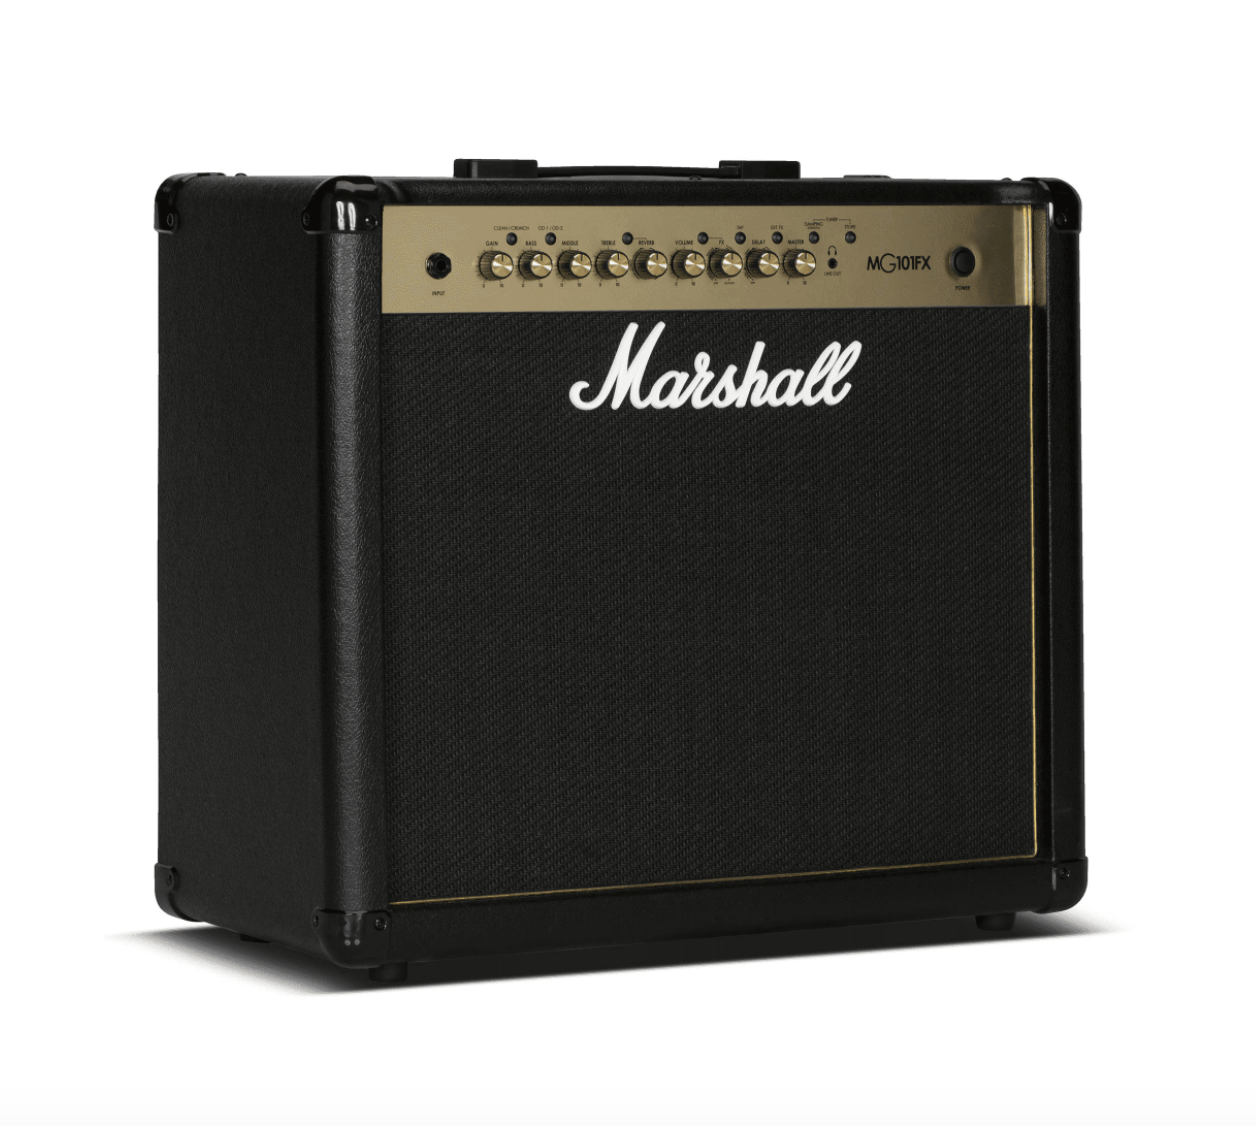 Marshall 100 Watt 1x12 combo, 4 programmable channels, FX, MP3, footswitch incl